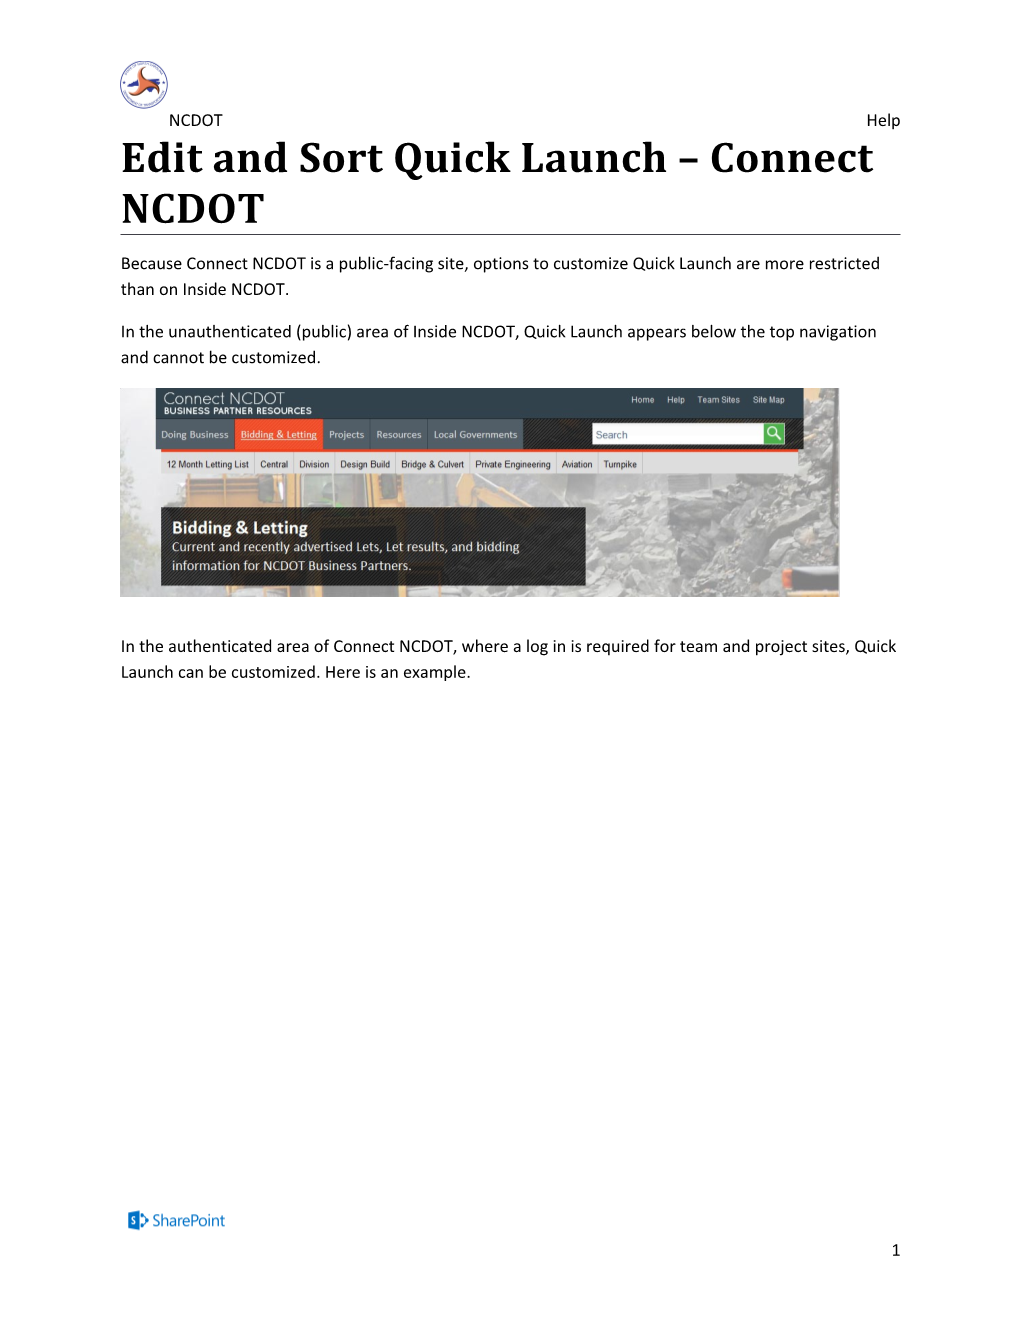 Edit and Sort Quick Launch - Connect NCDOT (D)